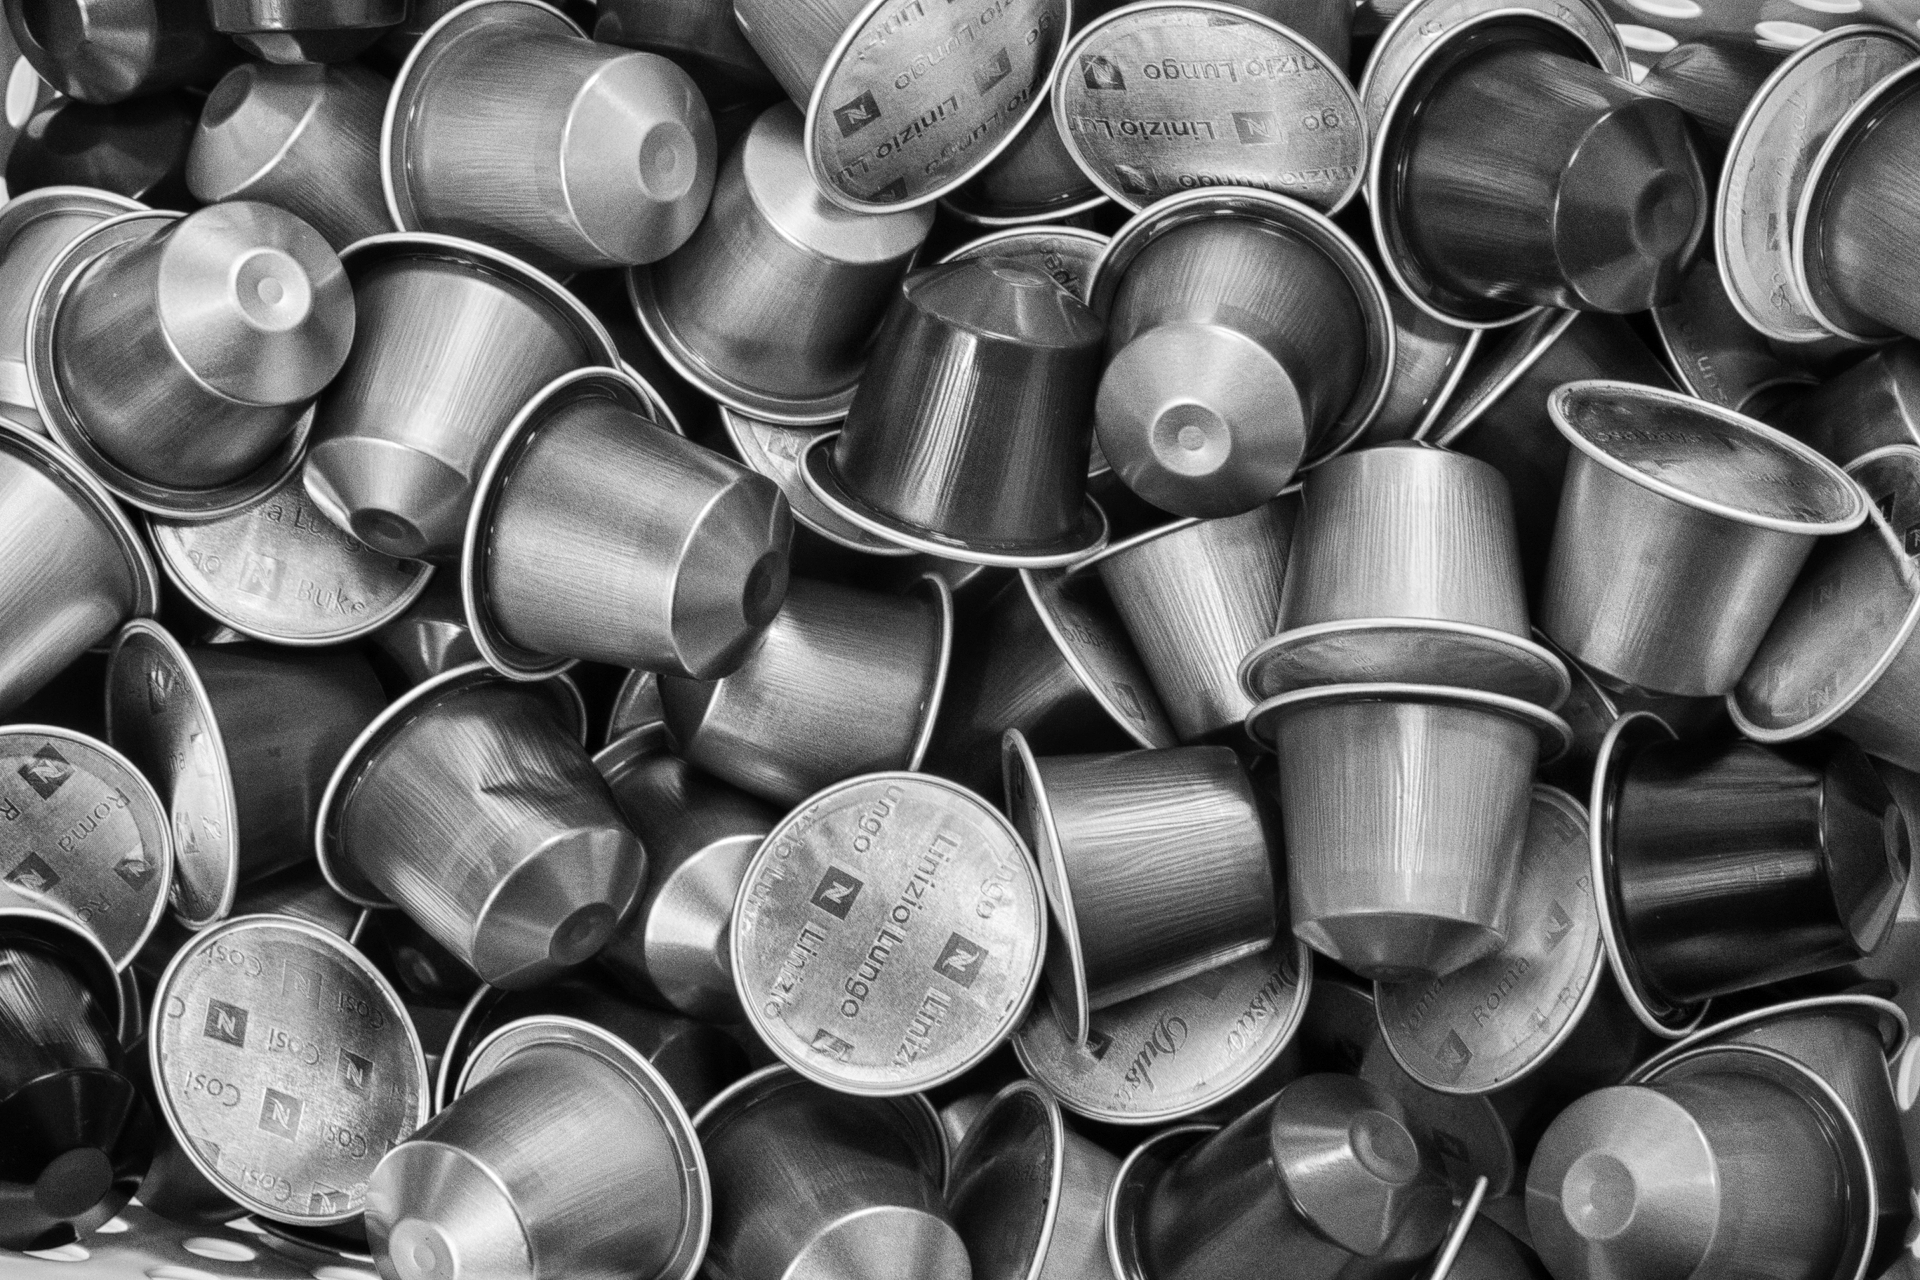 A pile of coffee capsules